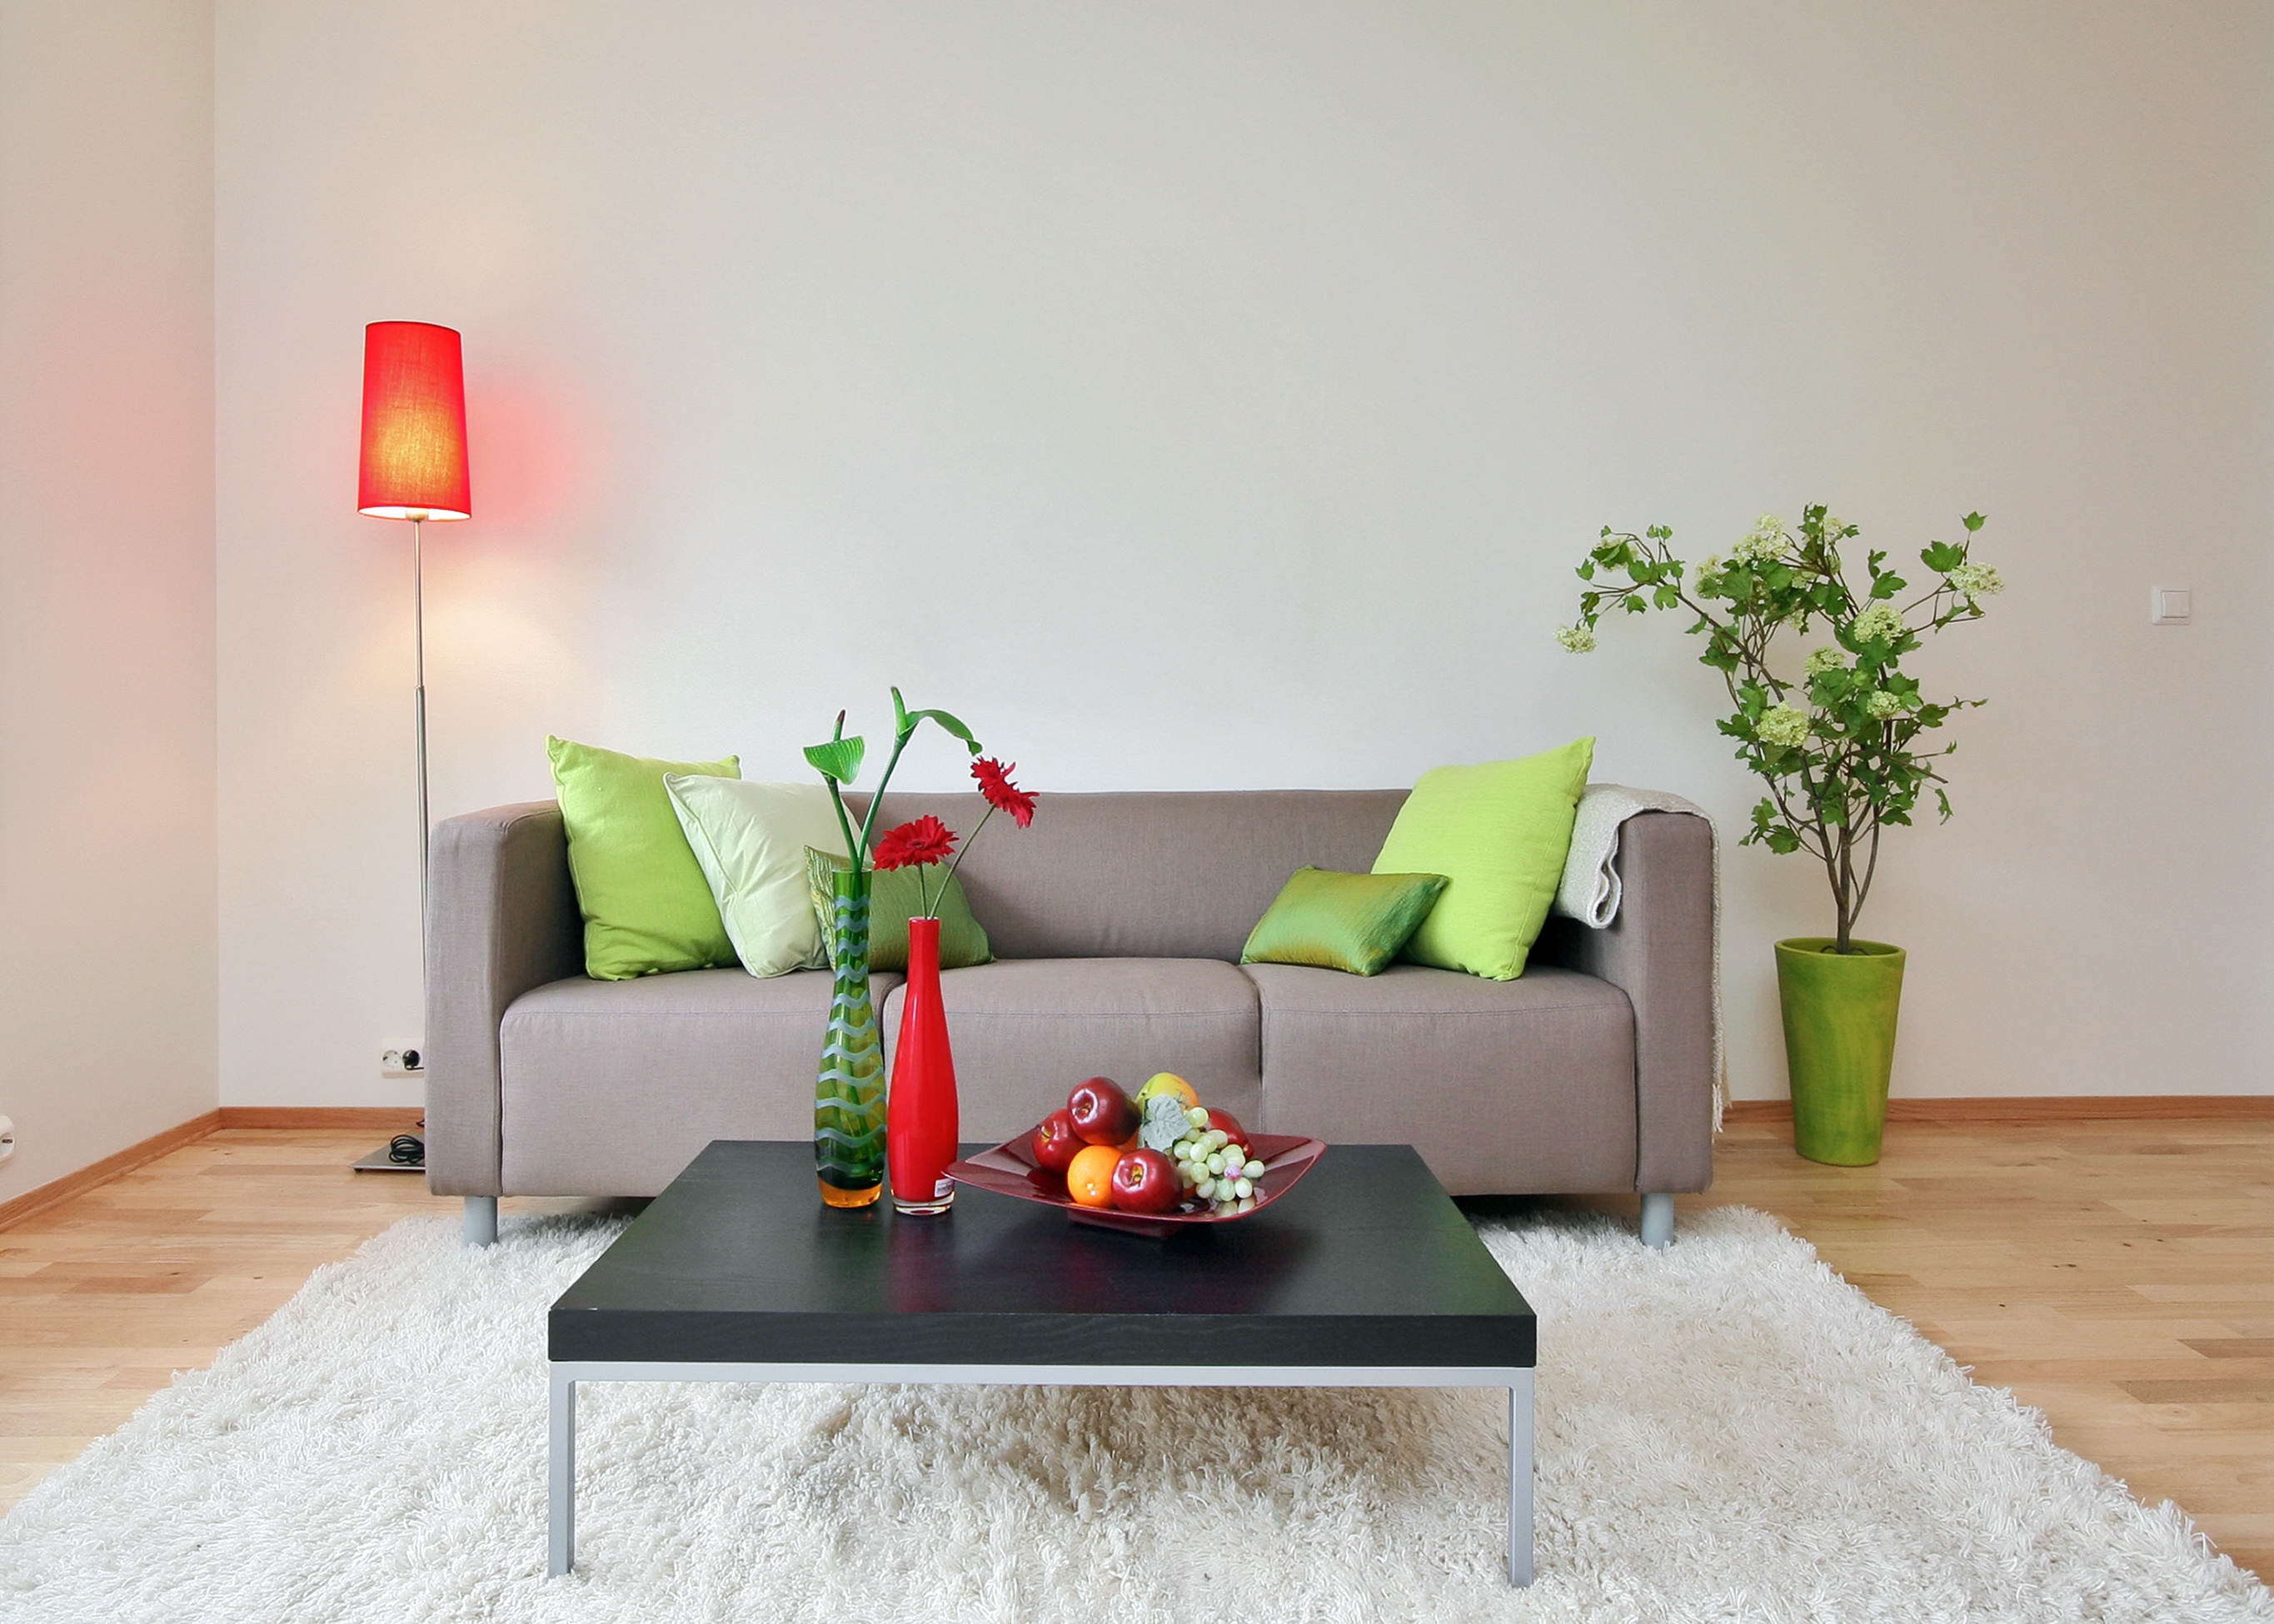 Free HD table, fruits, flowers, miscellanea, miscellaneous, living room, carpet